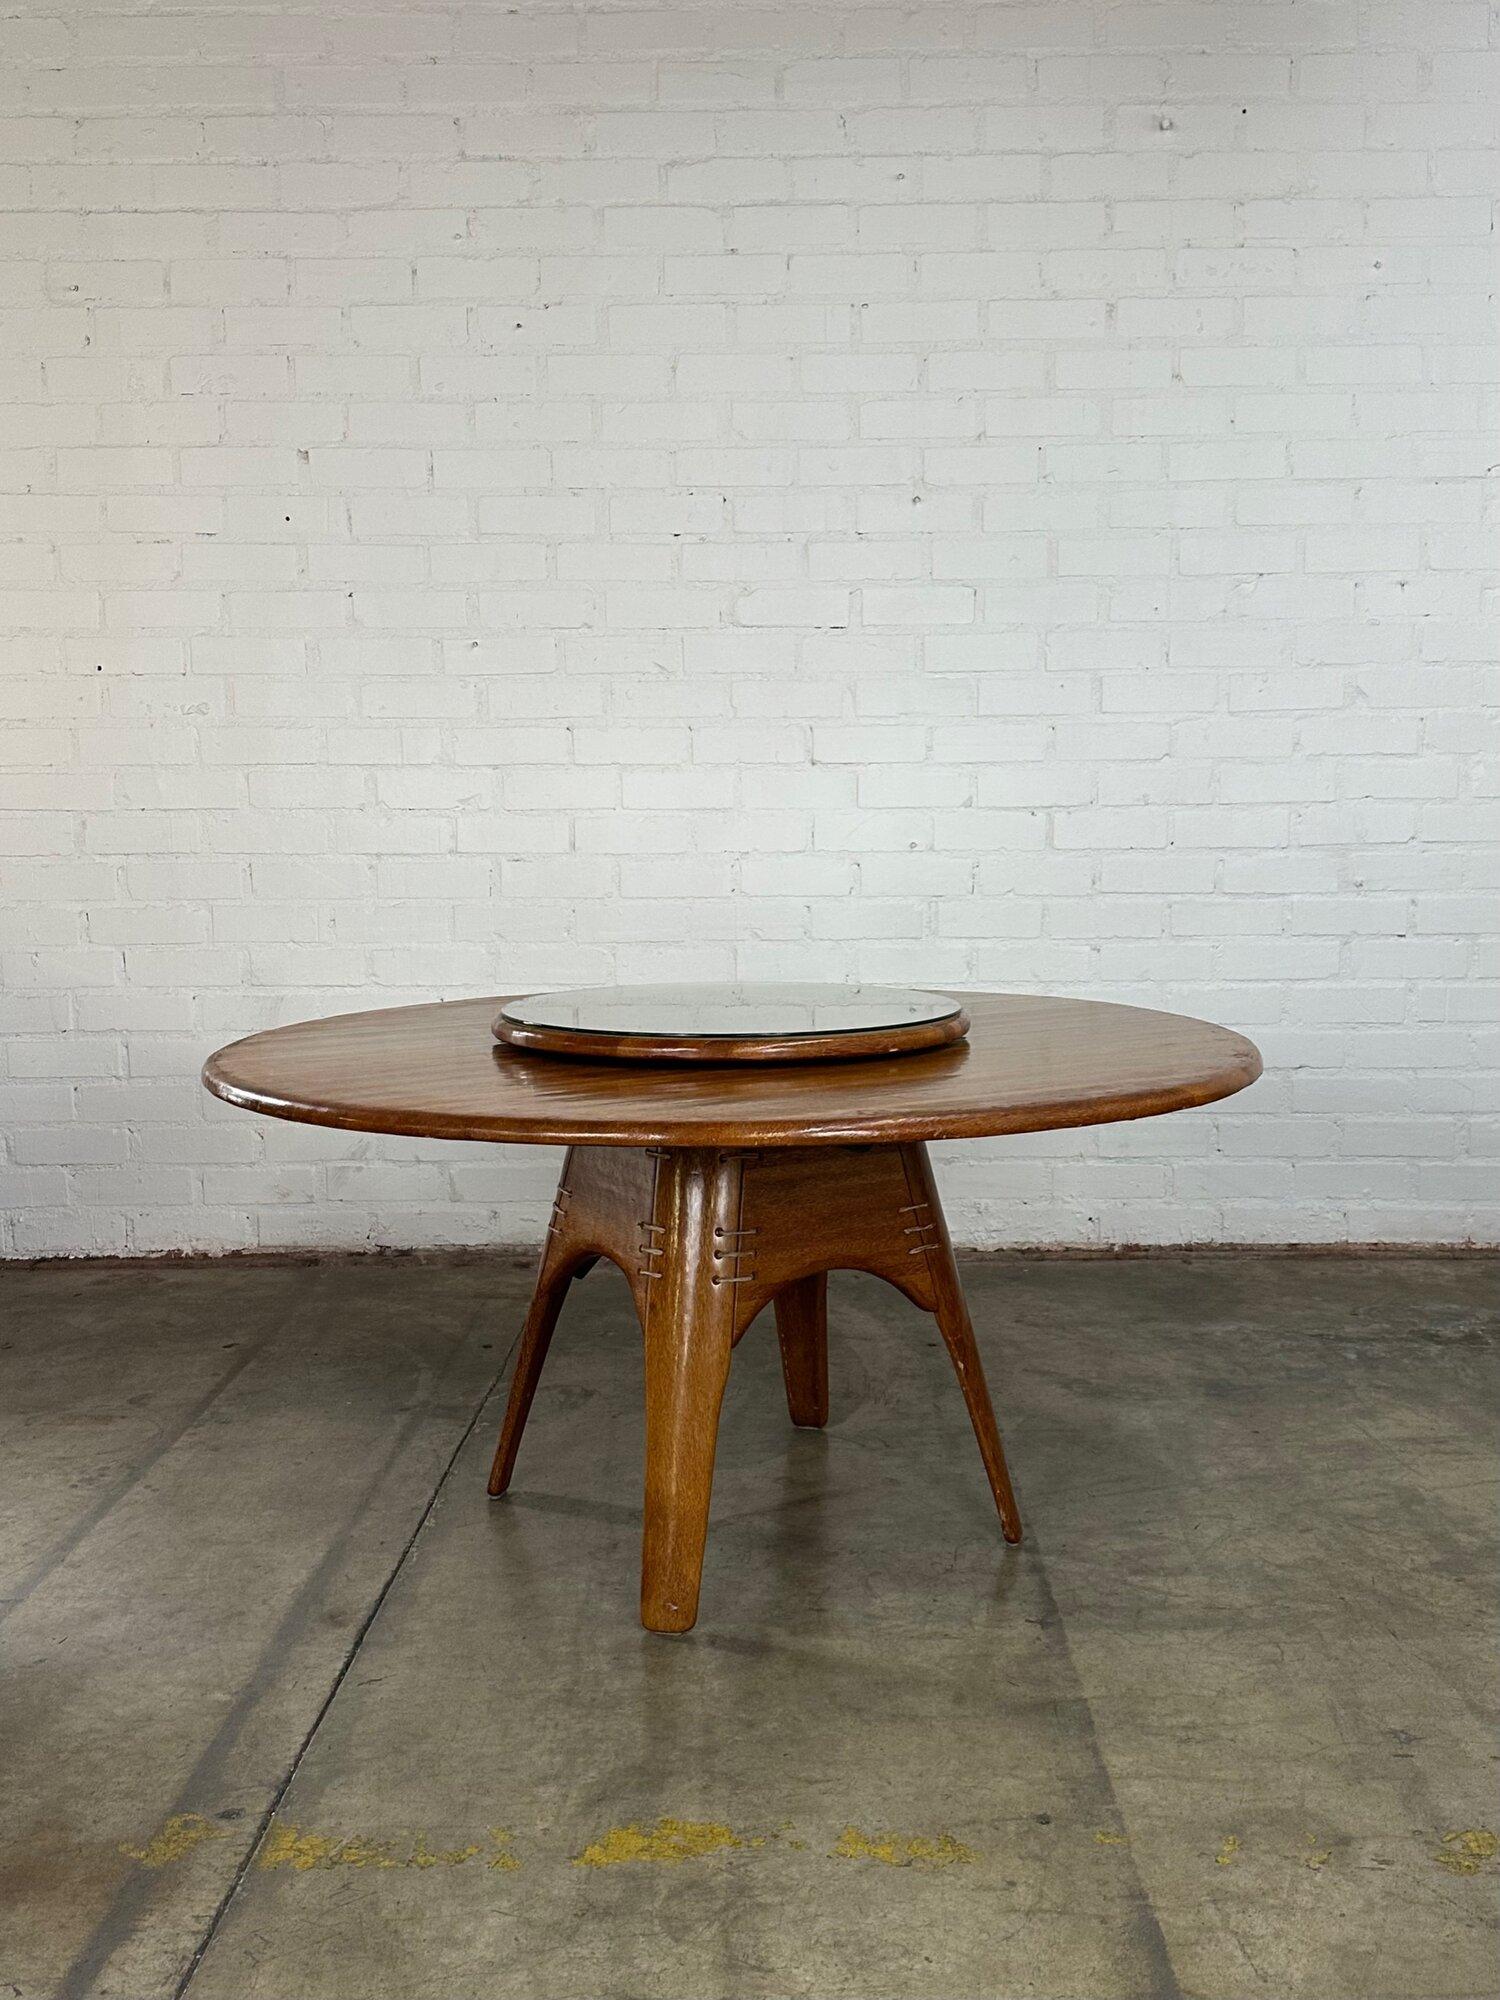 W58 D58 H28.5 KC27.75

top piece W26.5 H2

Vintage Palm wood dining table in great gently used condition. Table has a glass surface to protect table from everyday use and a removable matching lazy Susan and glass. Item is structurally sound and